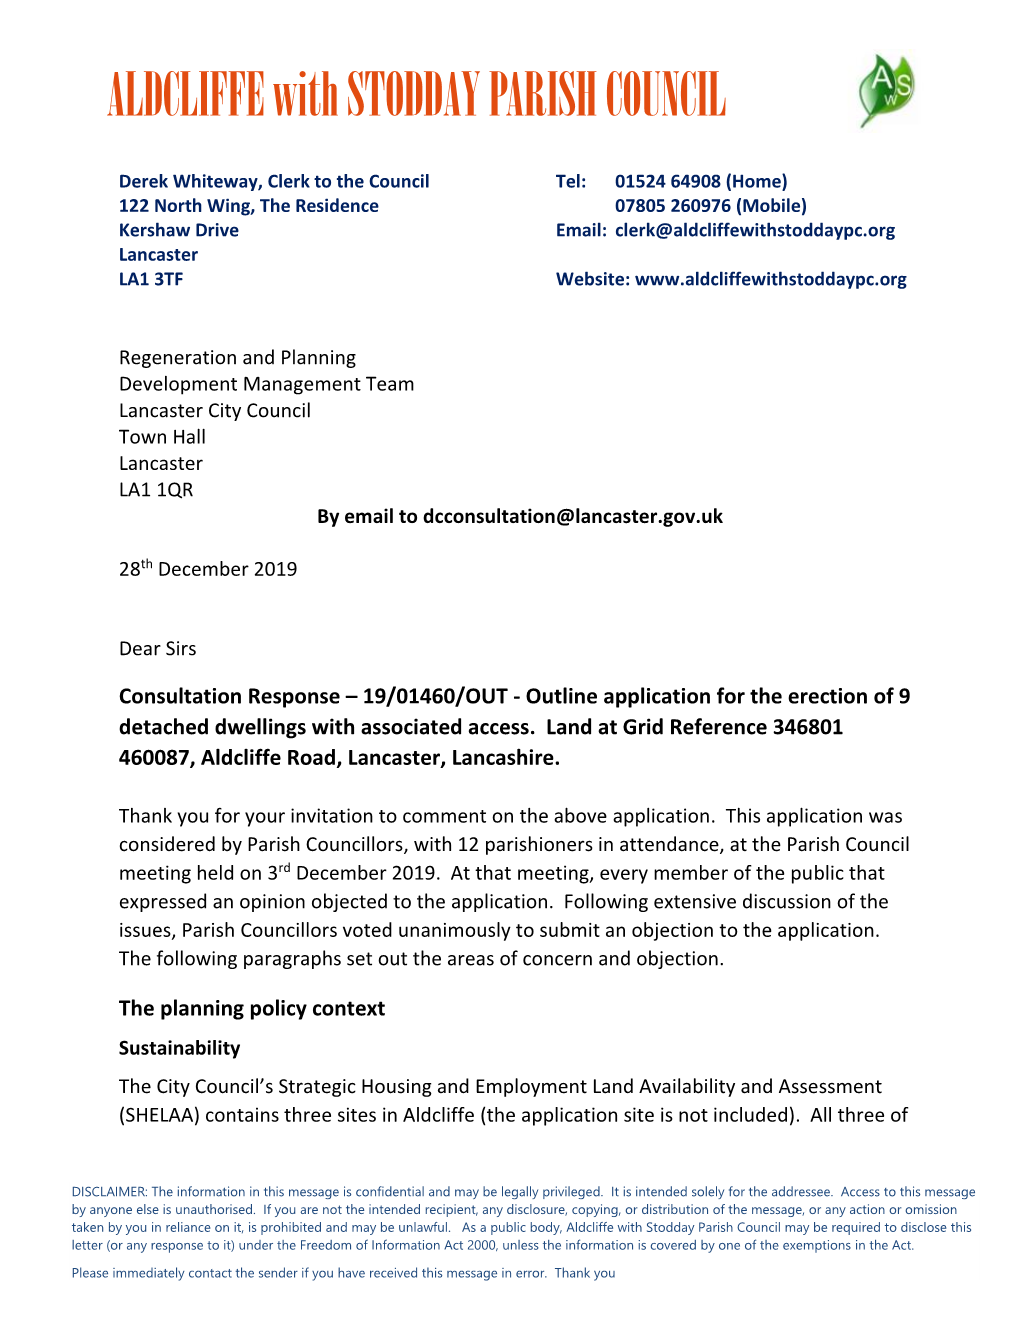 Consultation Response – 19/01460/OUT - Outline Application for the Erection of 9 Detached Dwellings with Associated Access